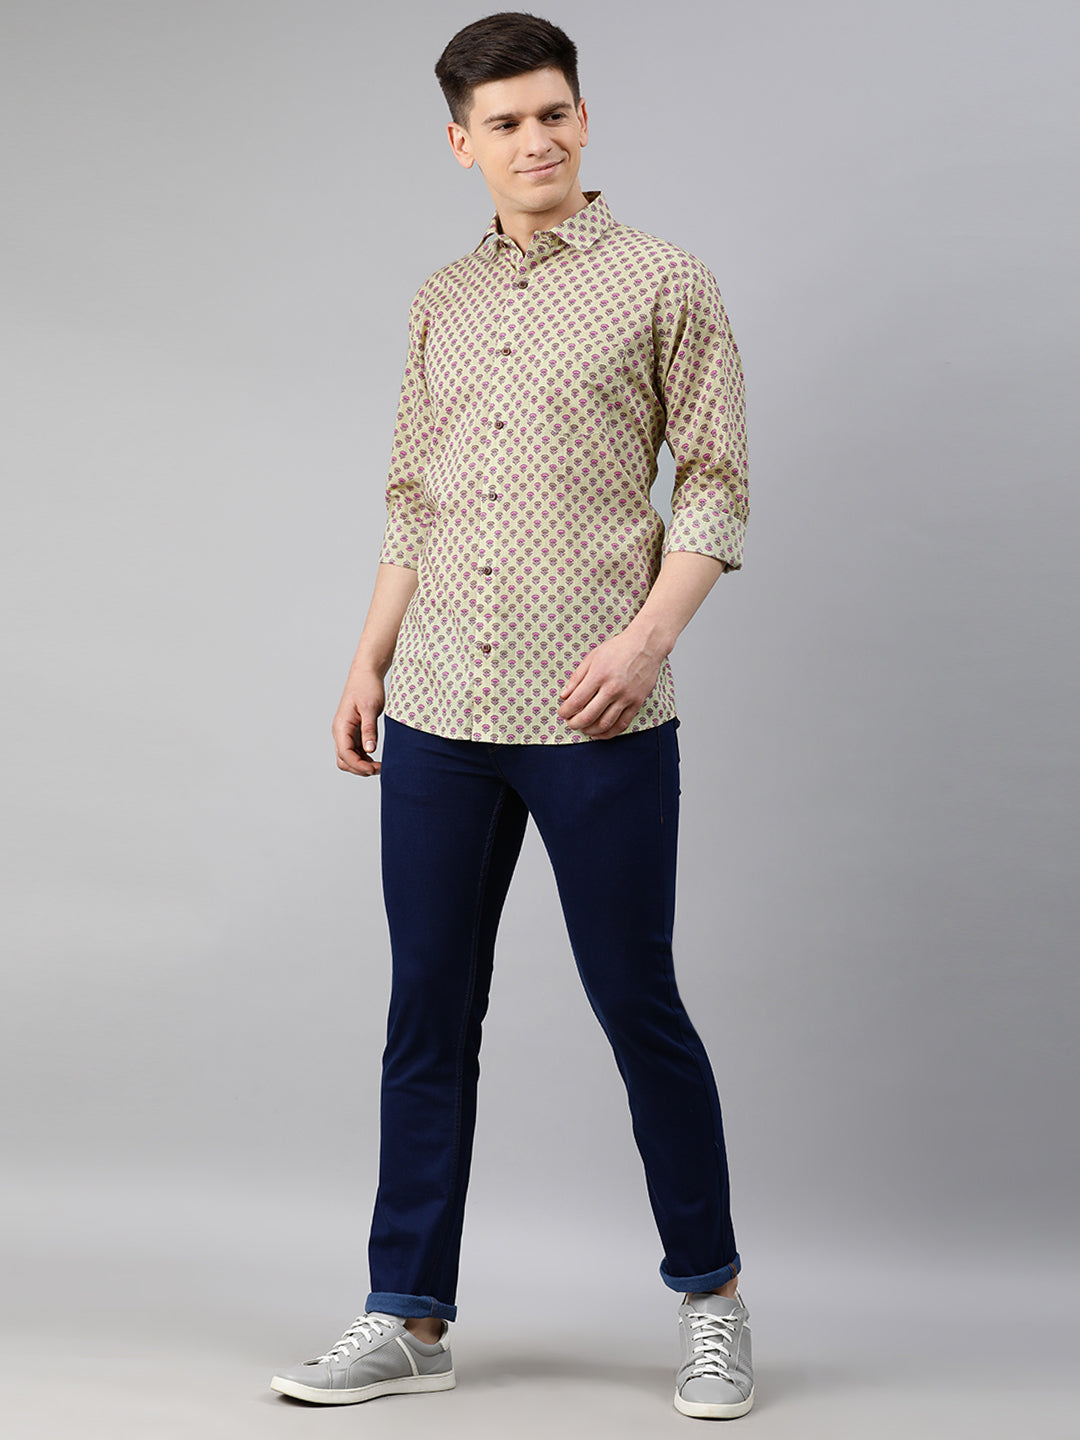 Yellow Cotton Full Sleeves Shirts For Men